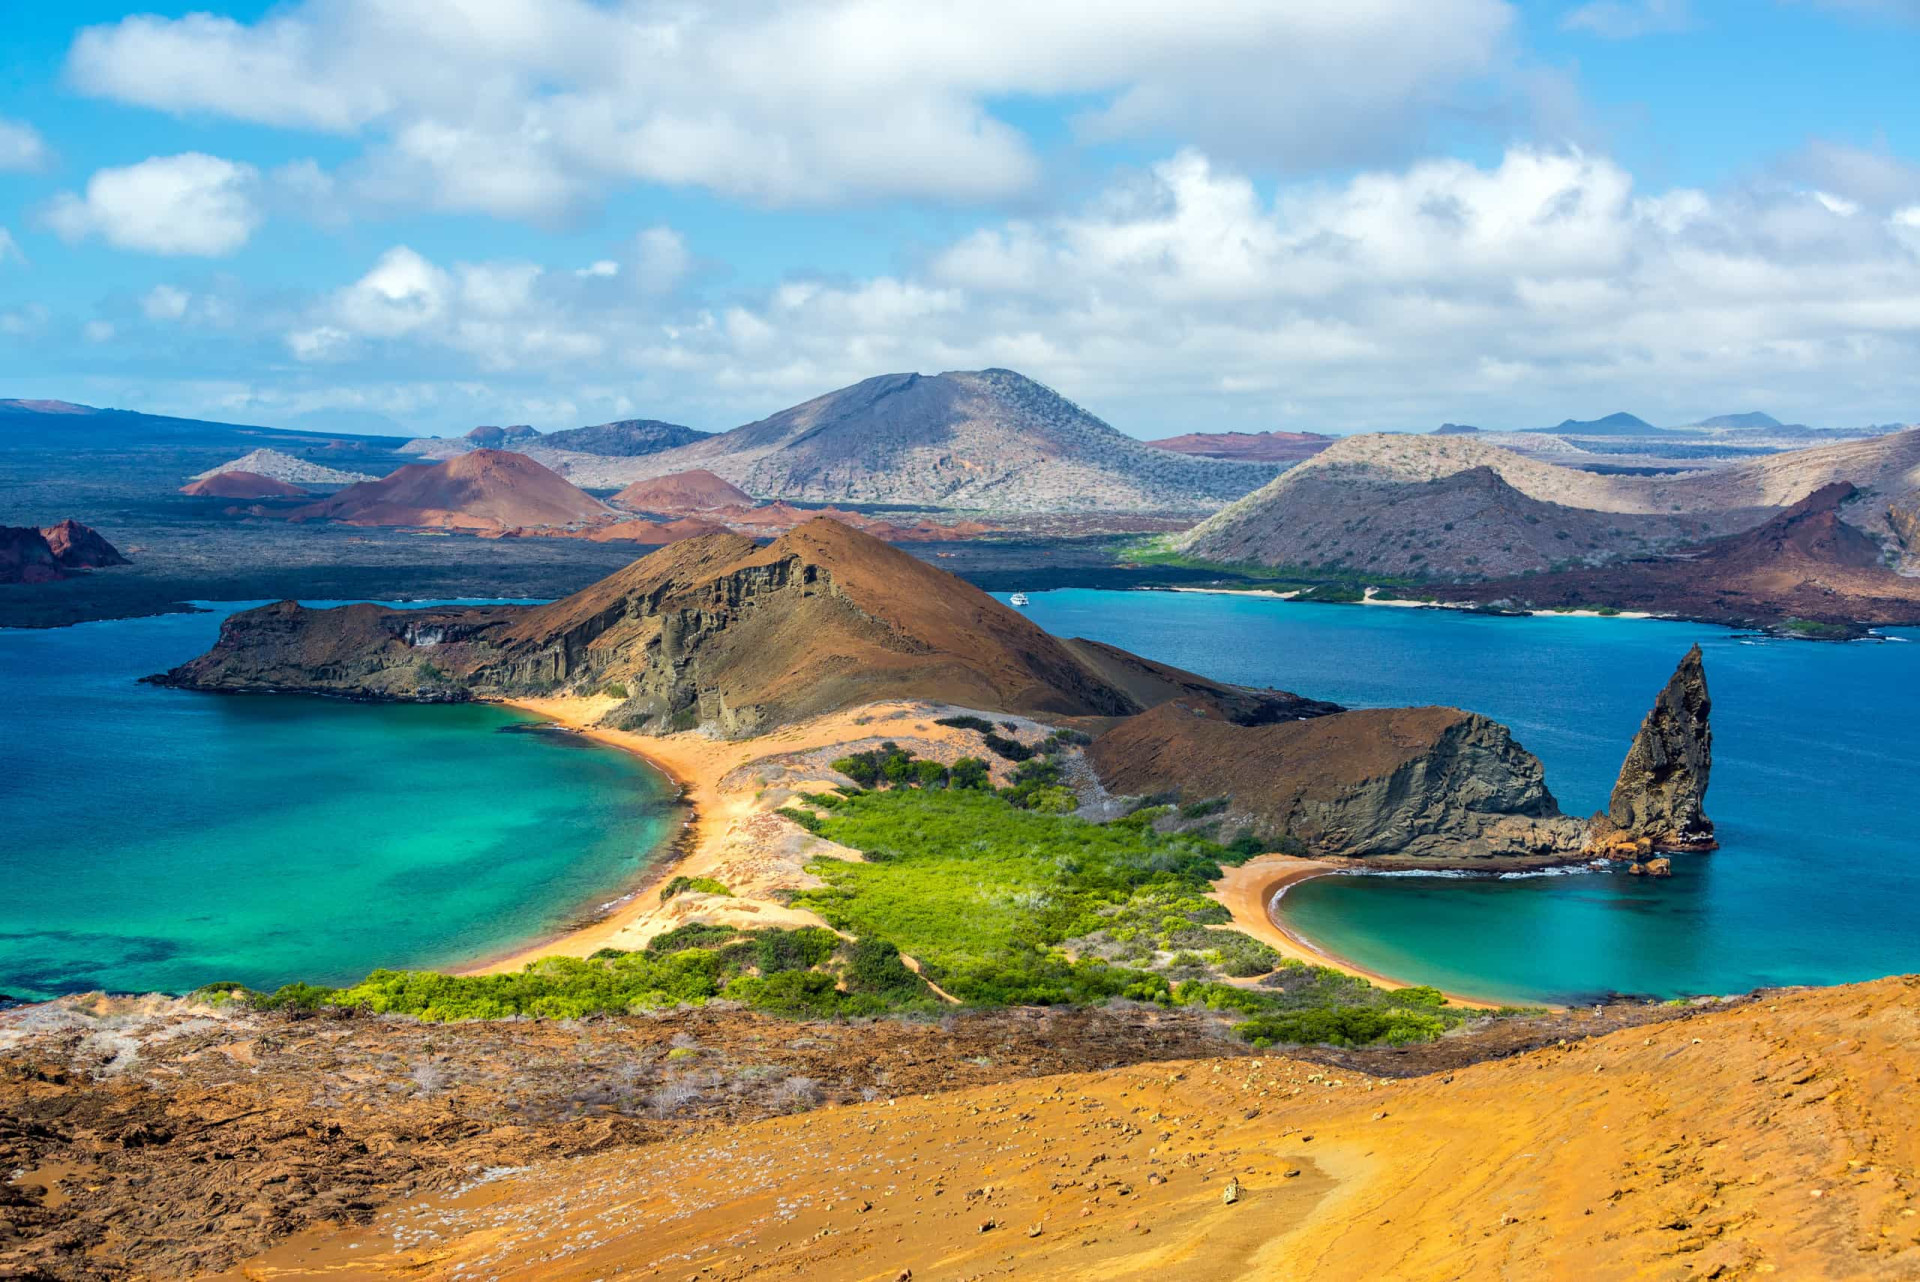 Location: Galápagos Province<br>Criteria: Natural<br>Year established: 1978<br>Description: Forever associated with Charles Darwin and his theory of evolution by means of natural selection, this remote archipelago is known for its large number of endemic species.<p><a href="https://www.msn.com/en-us/community/channel/vid-7xx8mnucu55yw63we9va2gwr7uihbxwc68fxqp25x6tg4ftibpra?cvid=94631541bc0f4f89bfd59158d696ad7e">Follow us and access great exclusive content every day</a></p>